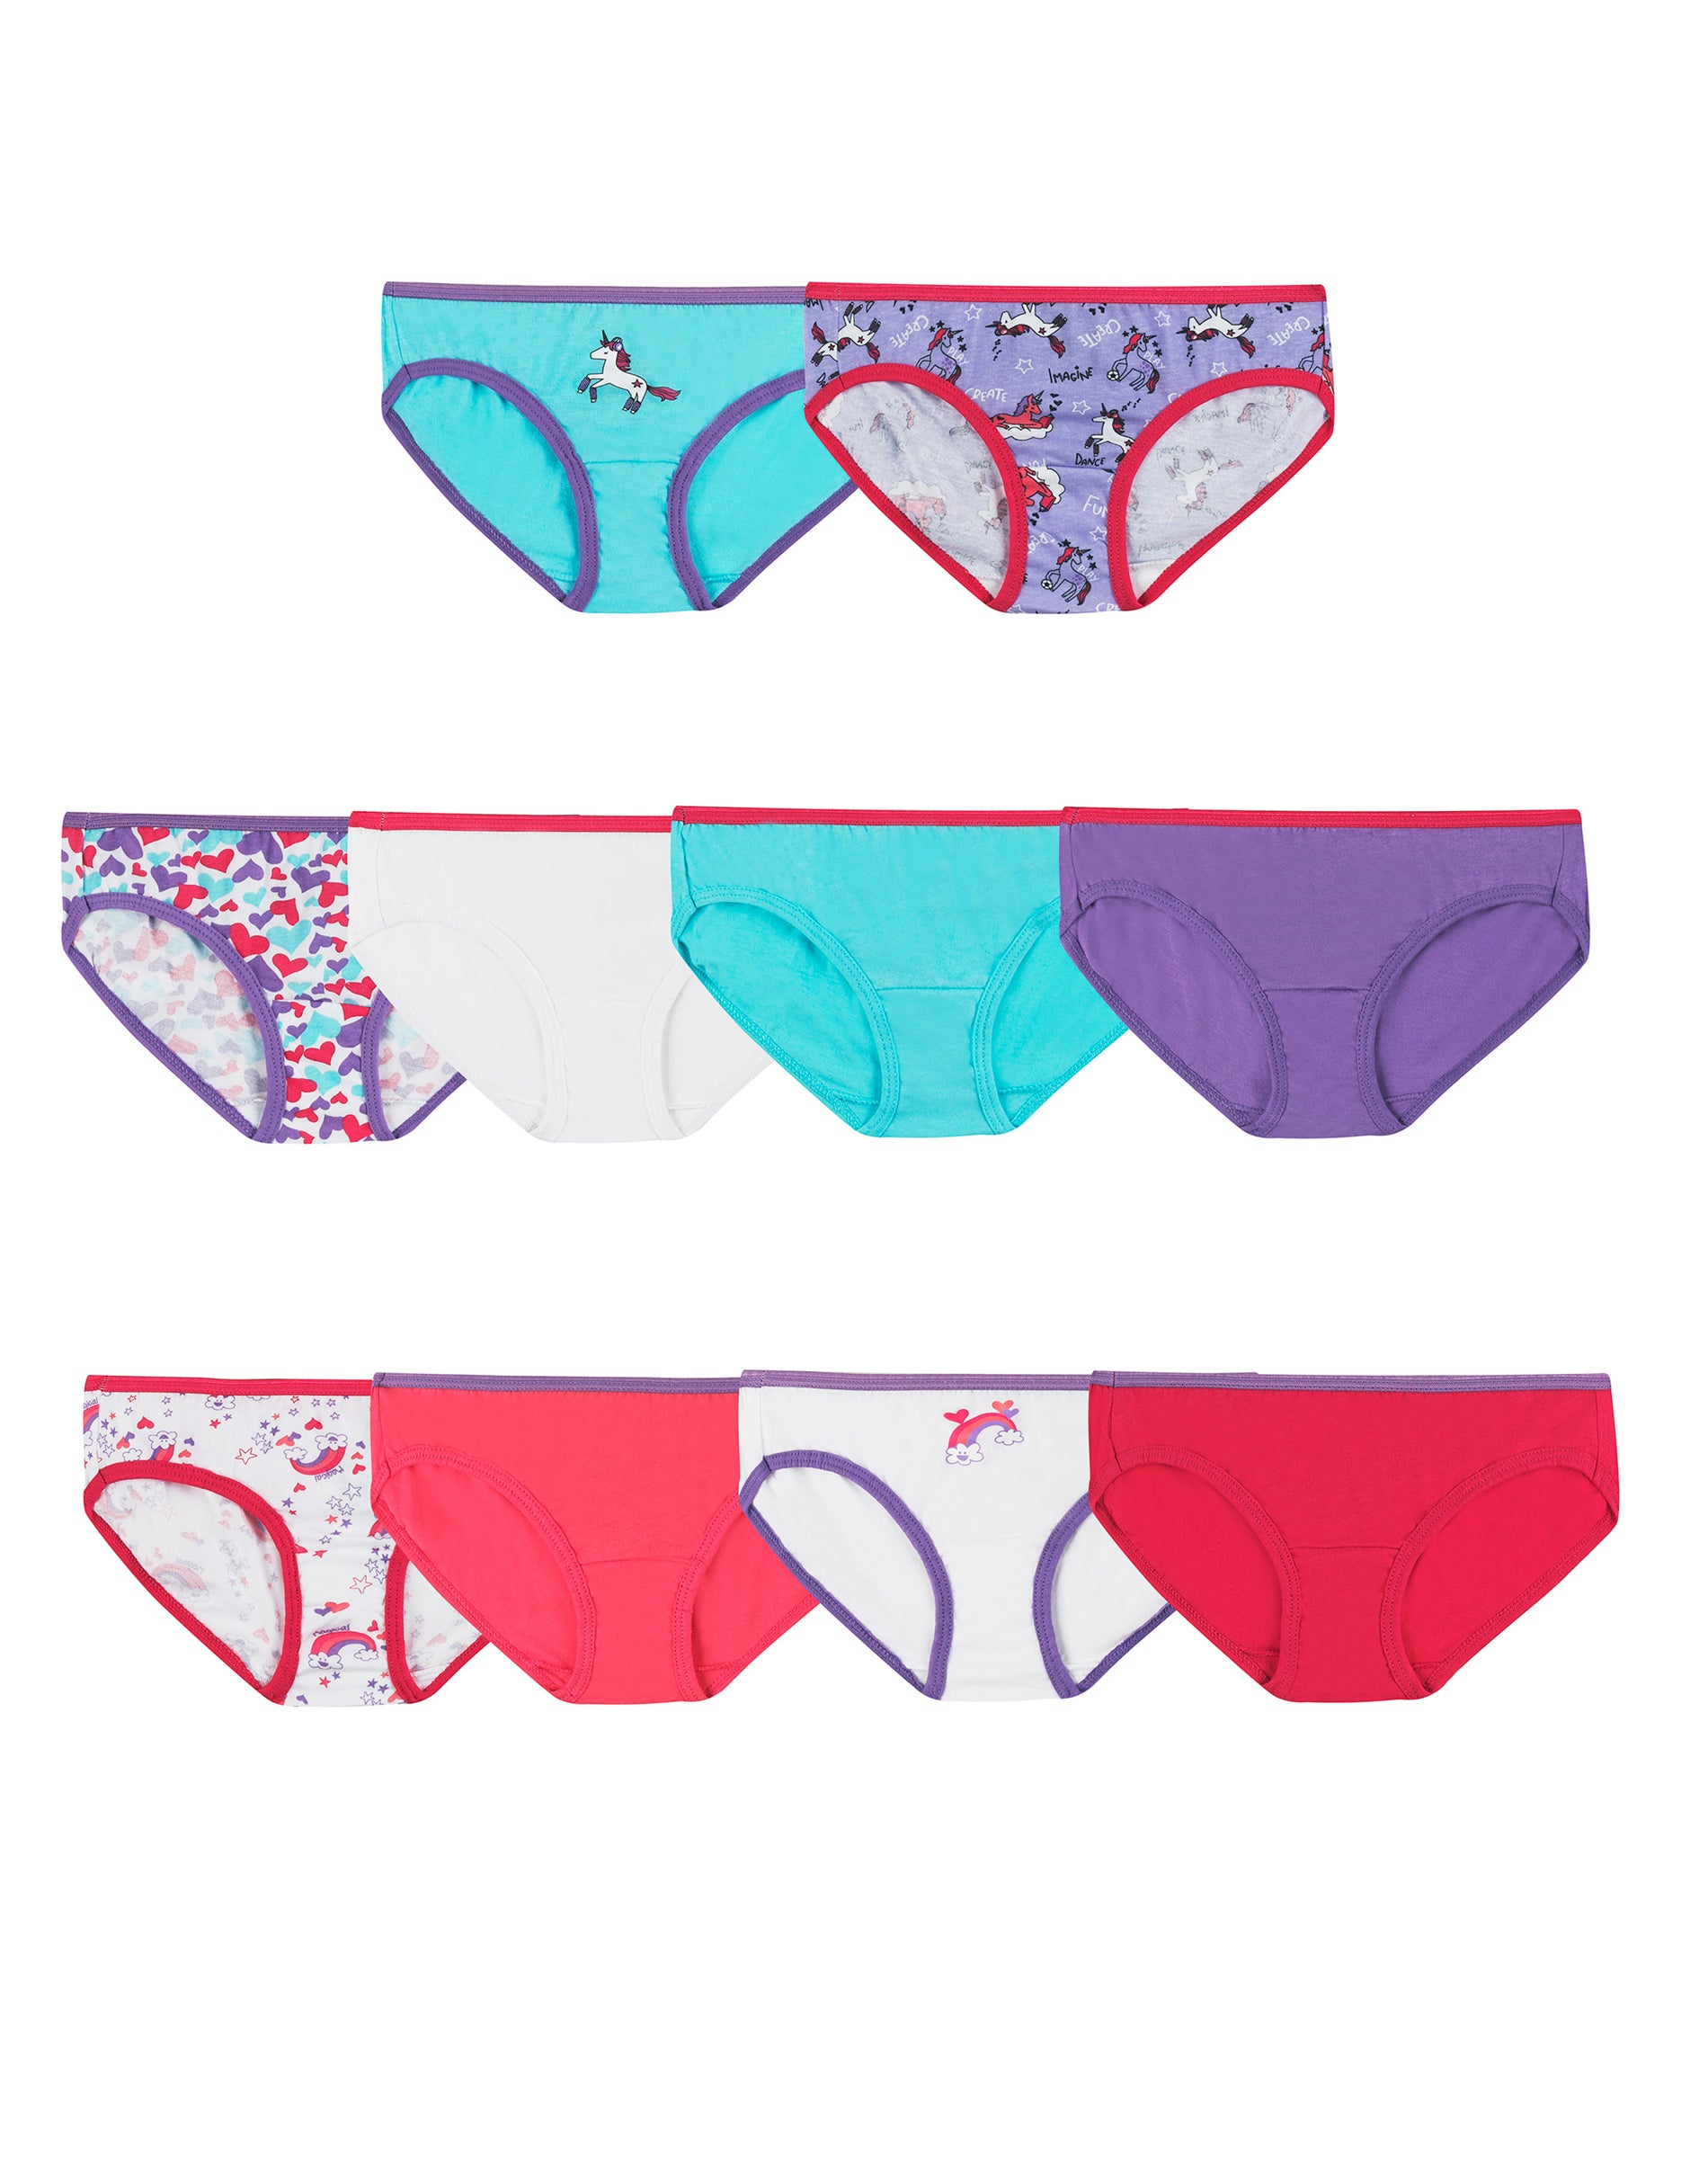 Hanes Girls' Cotton Hipster Underwear, Assorted, 10-Pack 1 6 - image 2 of 4